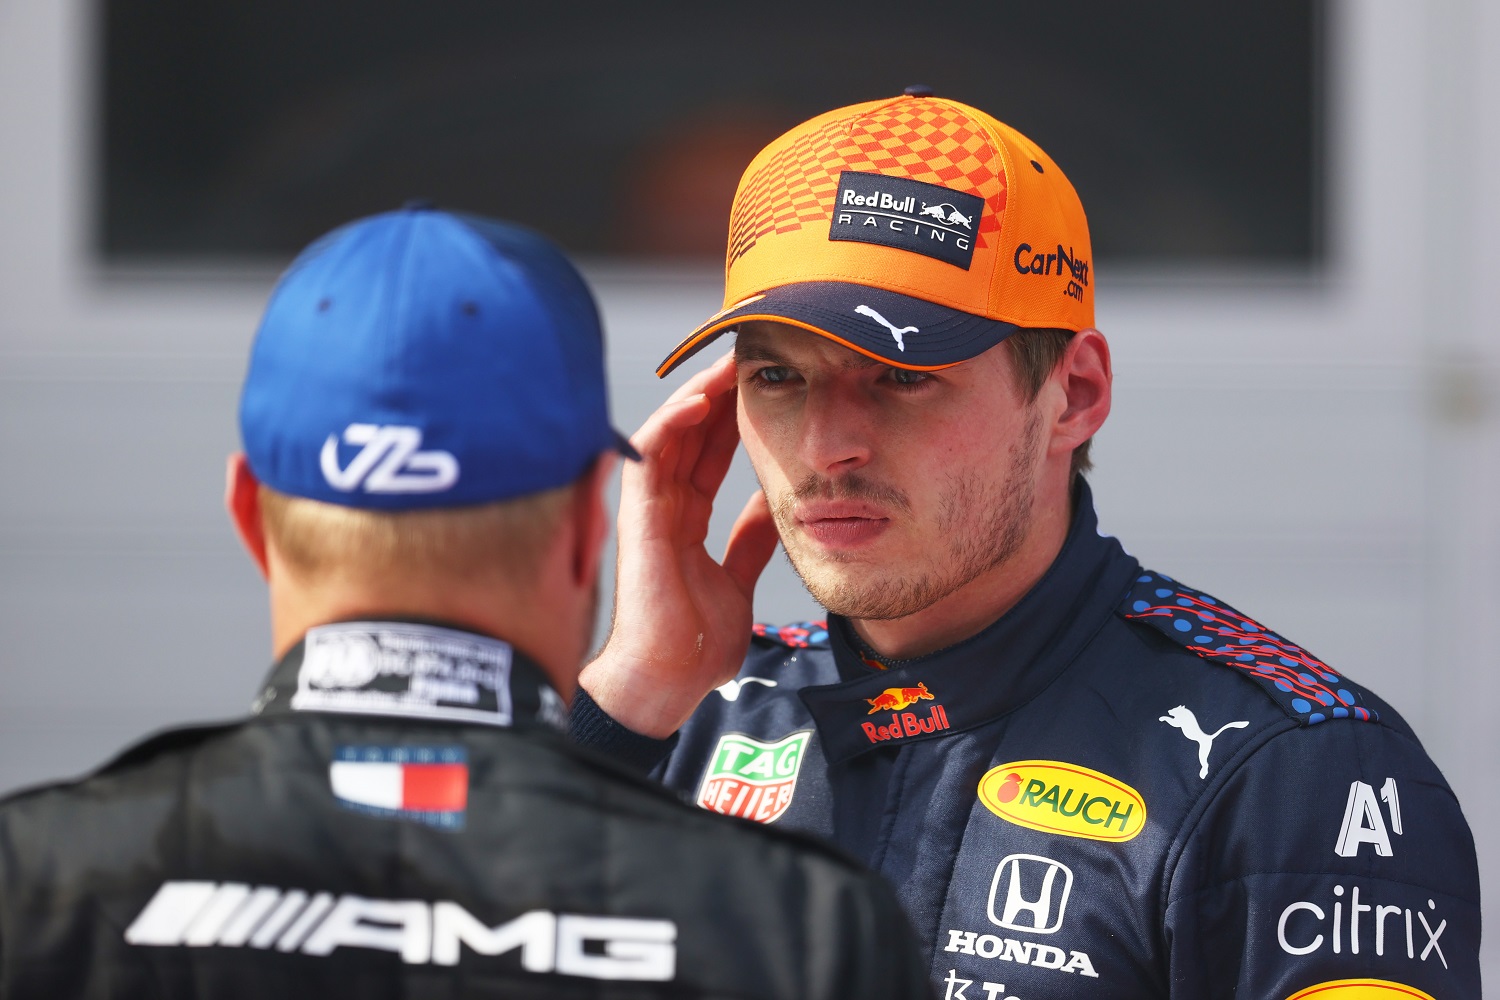 Race winner Max Verstappen of Red Bull Racing and second-place finisher Valtteri Bottas of Mercedes talk at the F1 Grand Prix of Austria at Red Bull Ring.